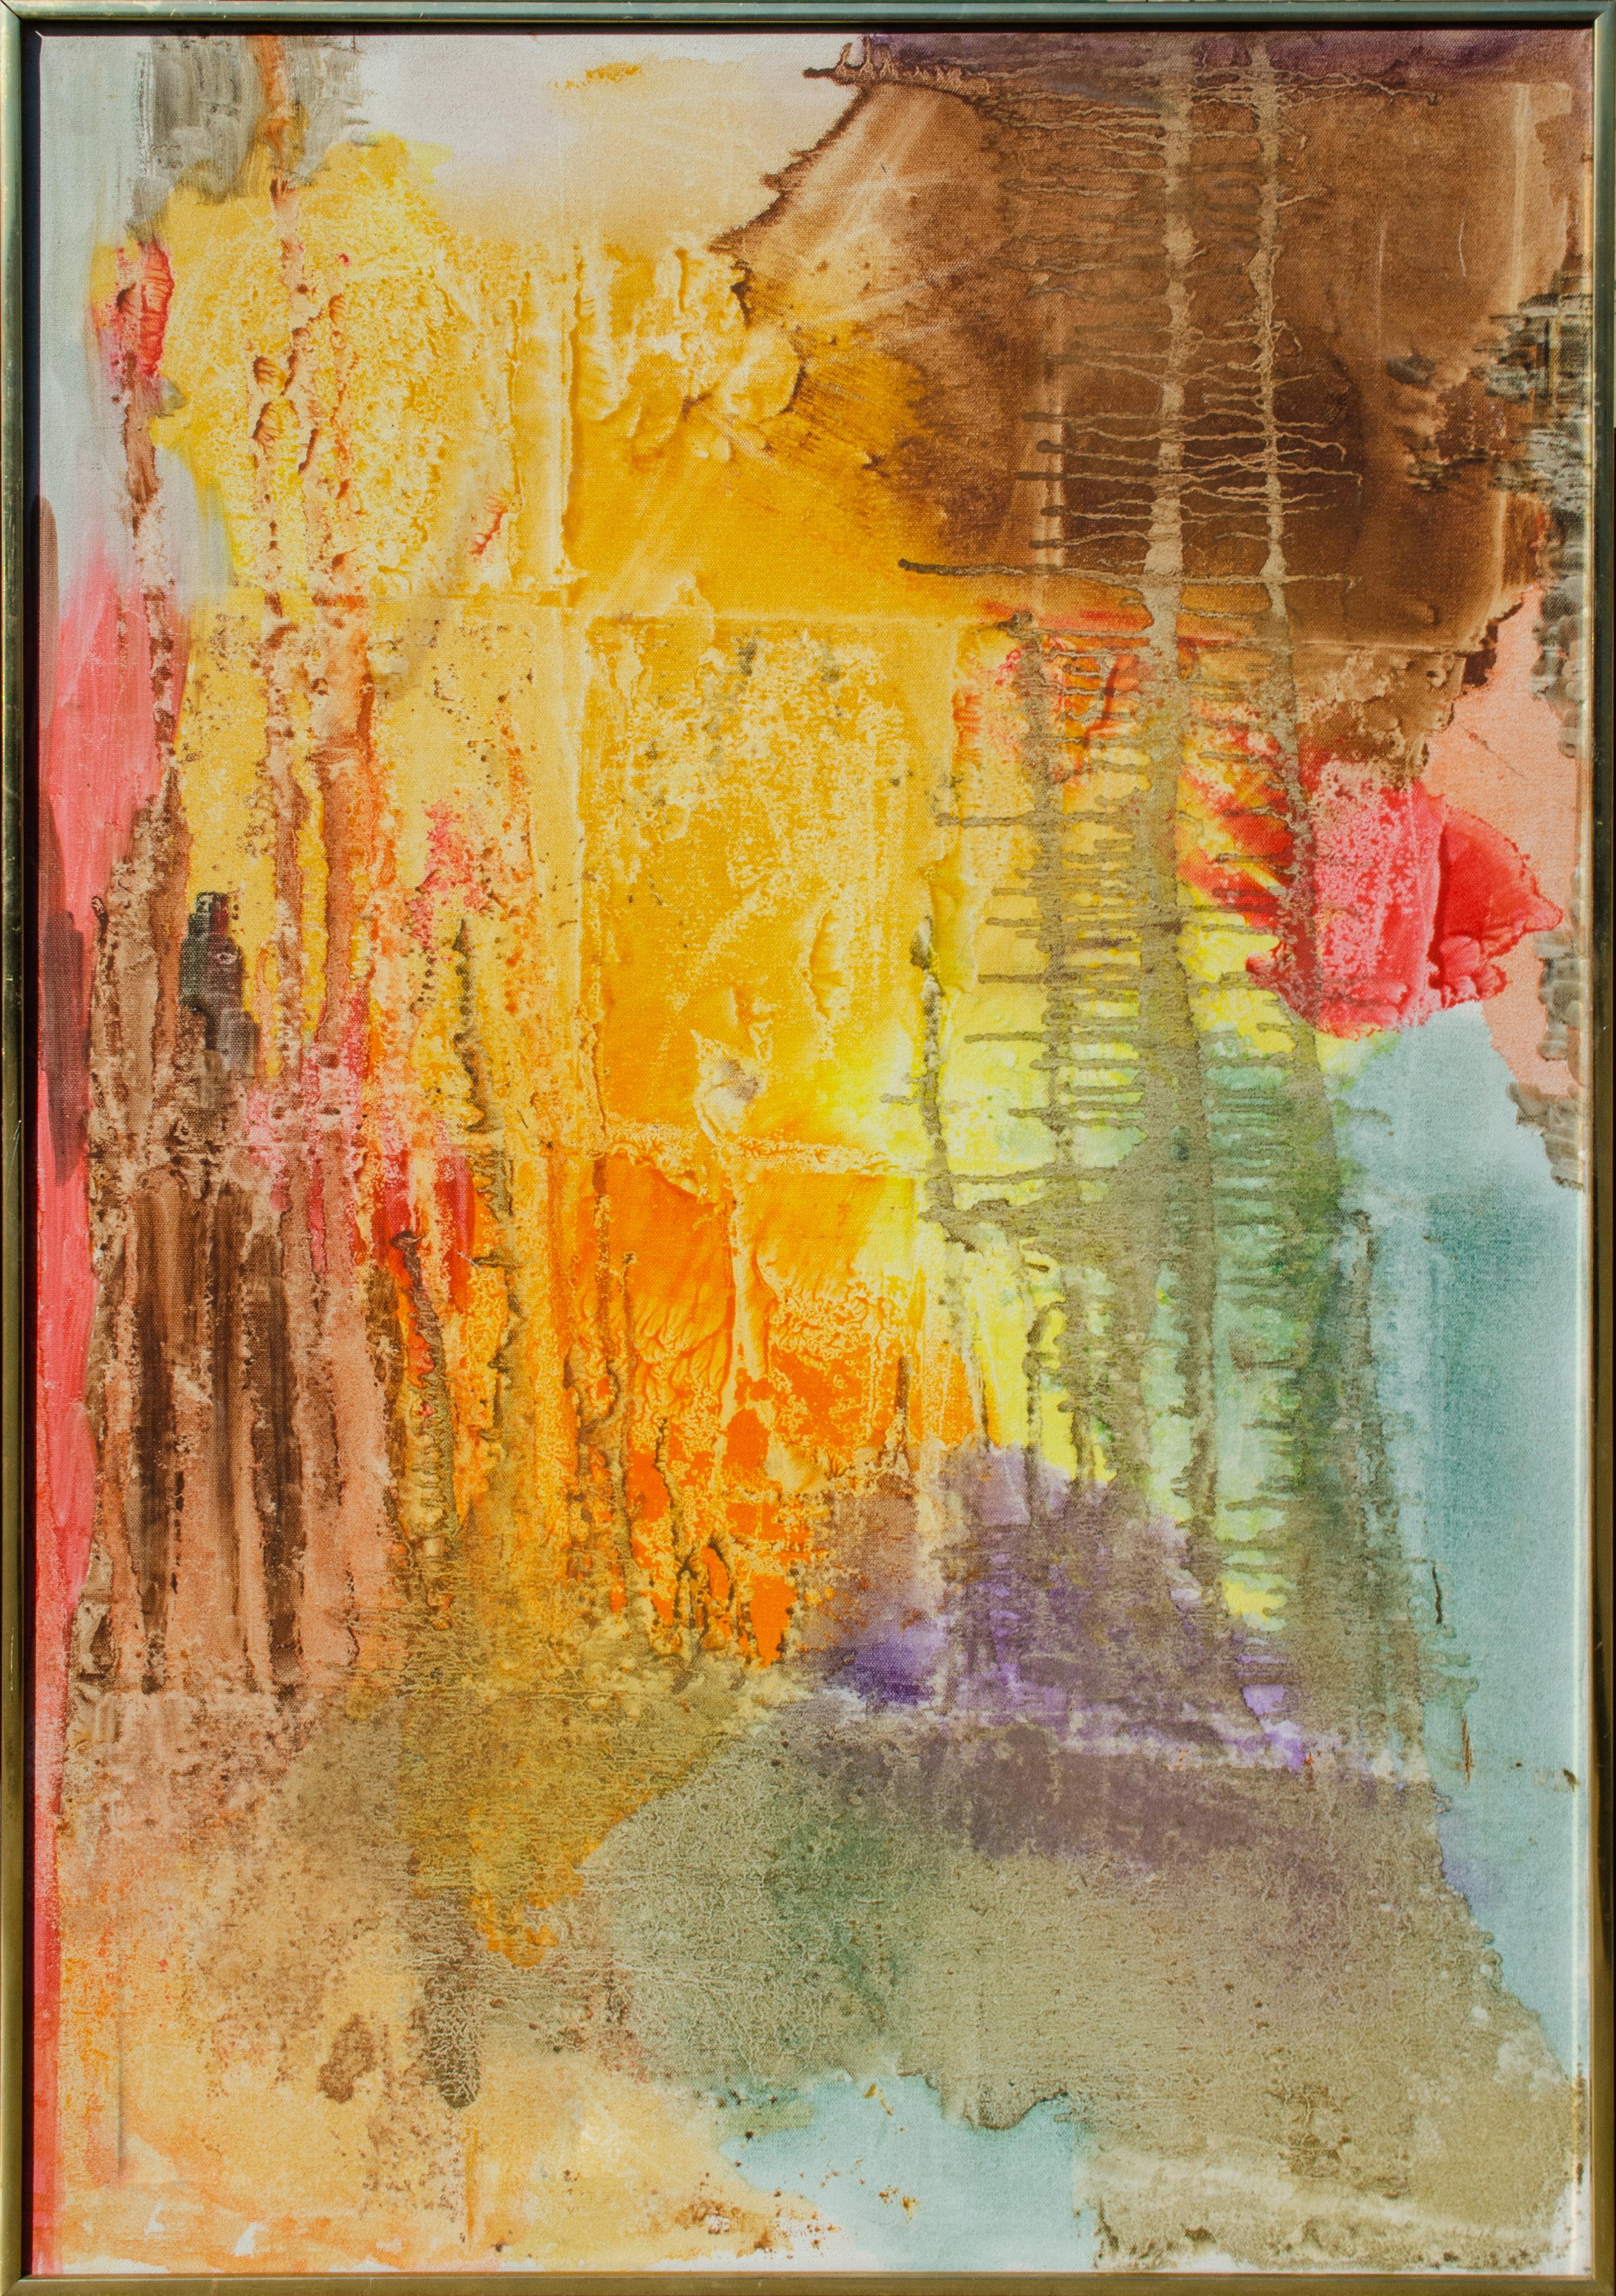 Abstract Painting Unknown - Abstraction colorée des années 1970, signée « Soyer » illisible